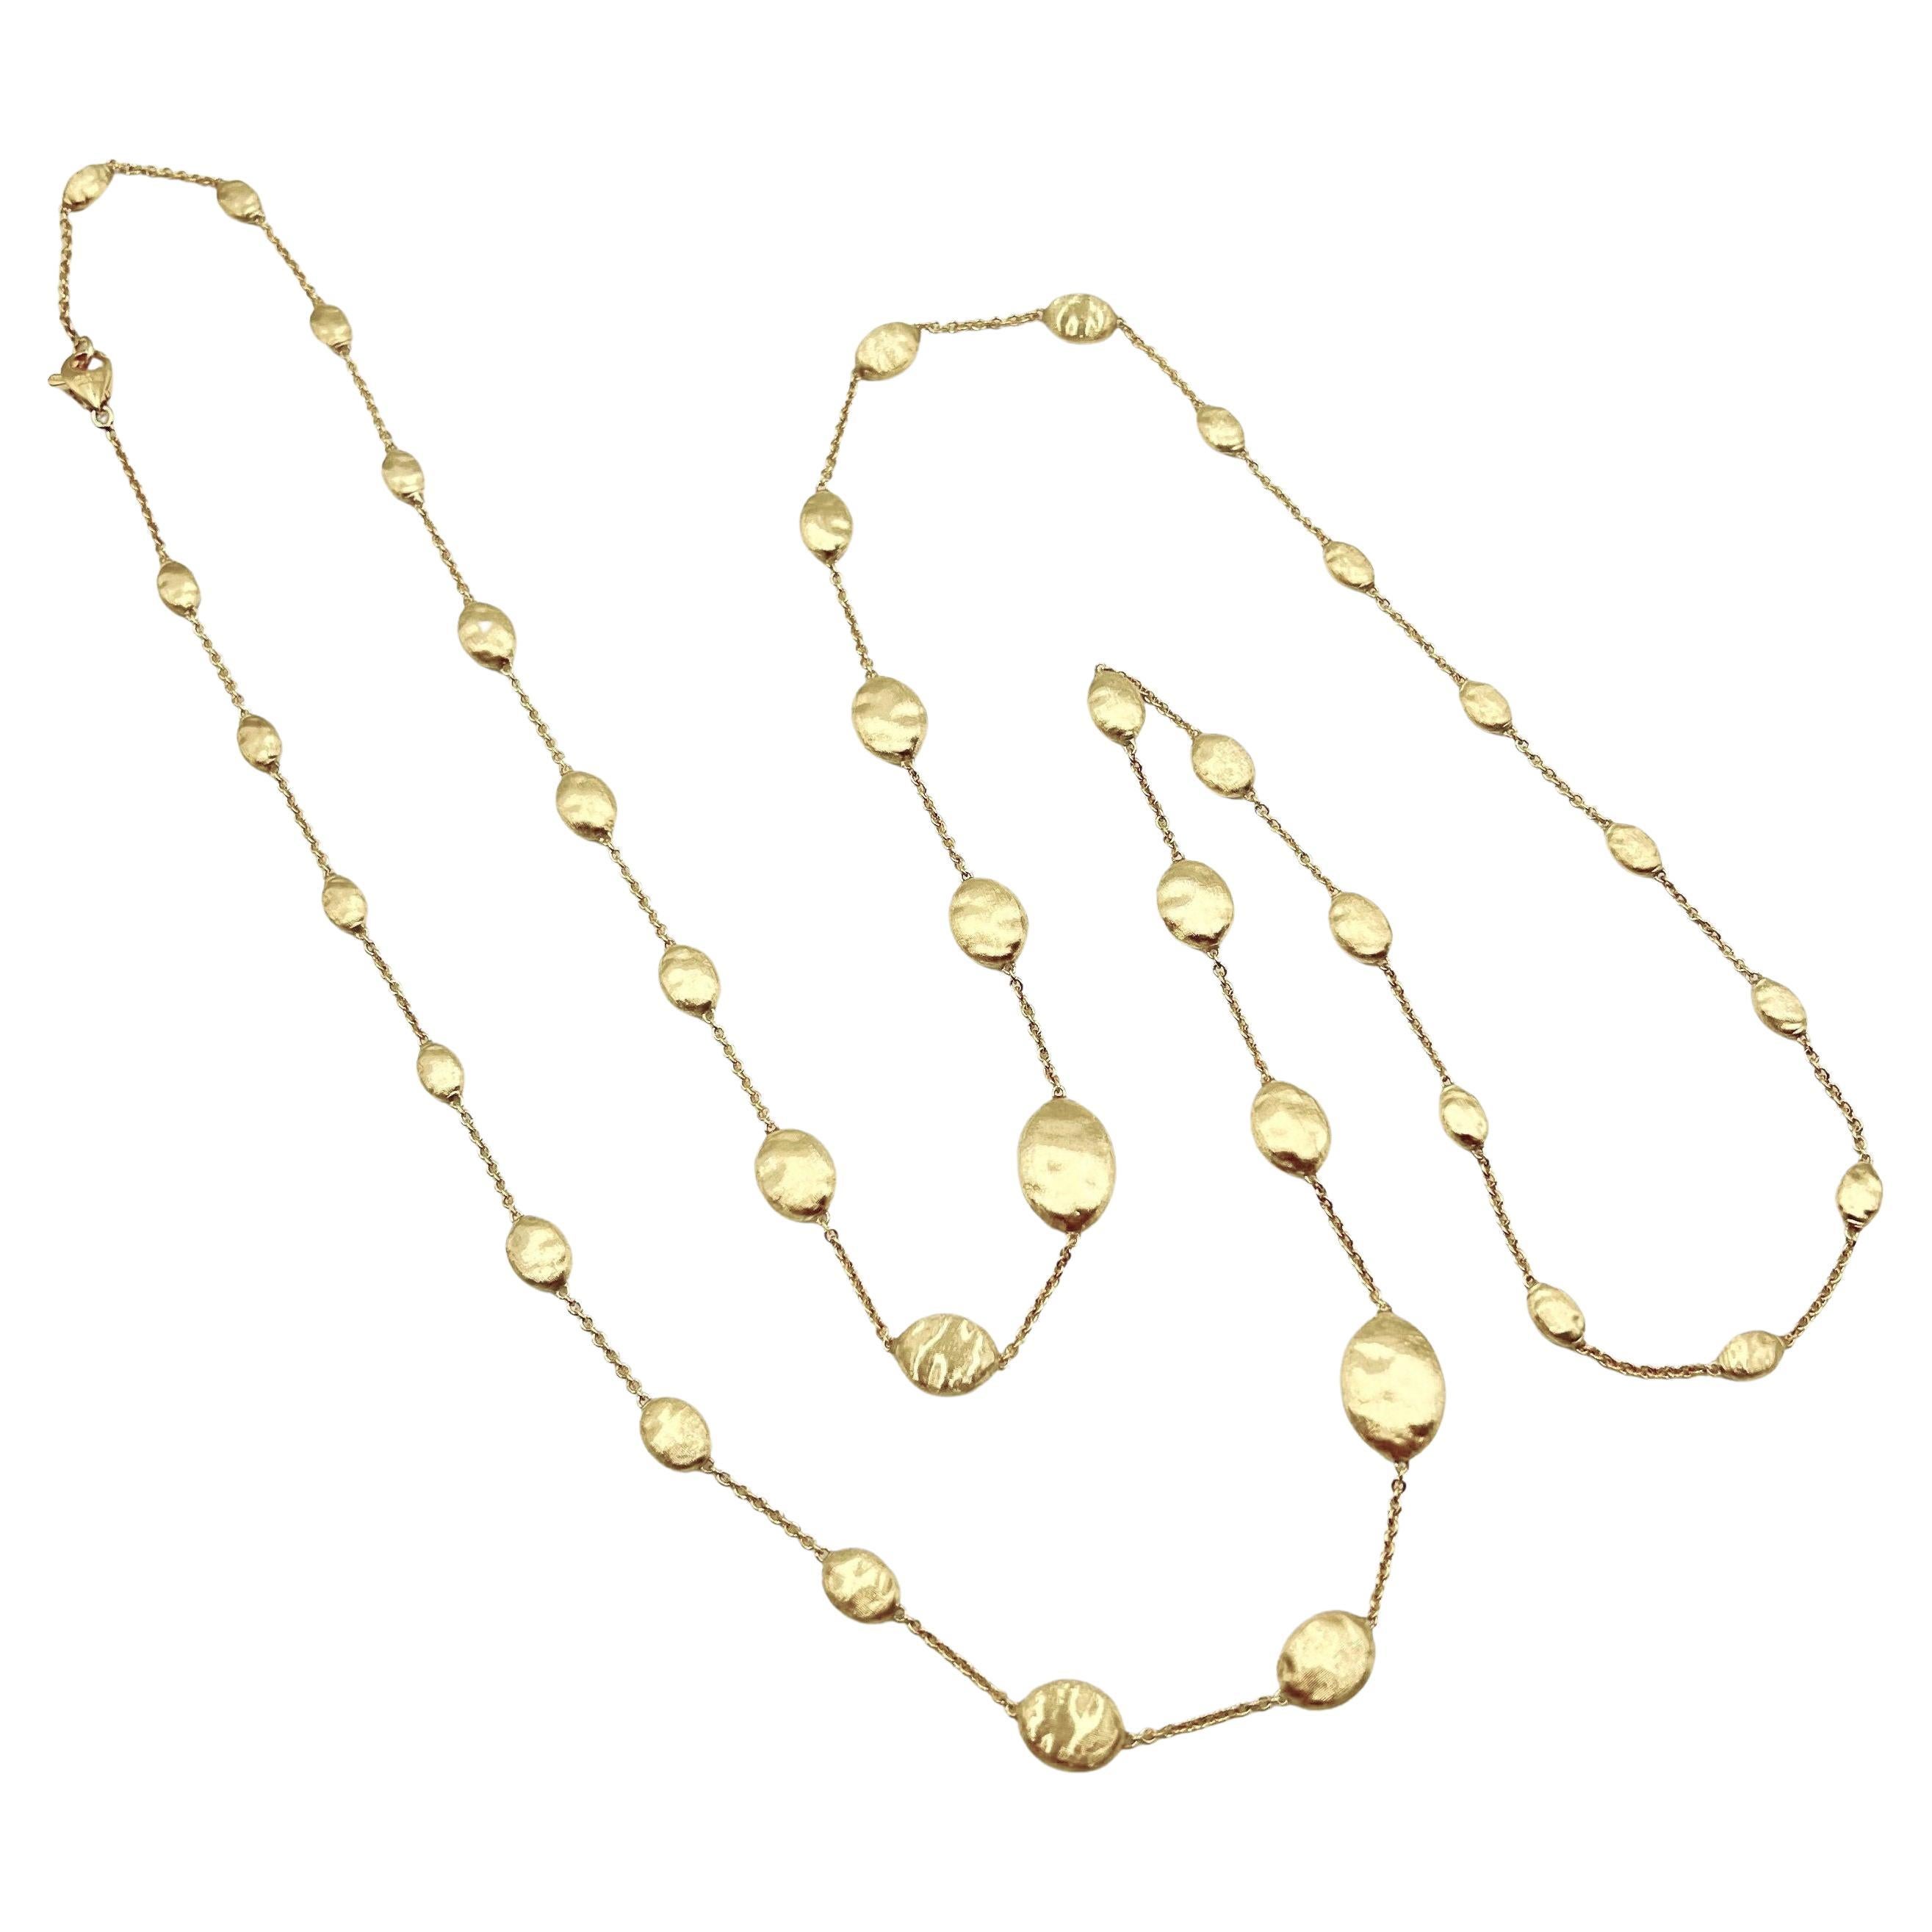 Siviglia large bead station necklace, featuring delicately hand-engraved 18k yellow gold beads separated by polished 18k yellow gold chain. Signed 